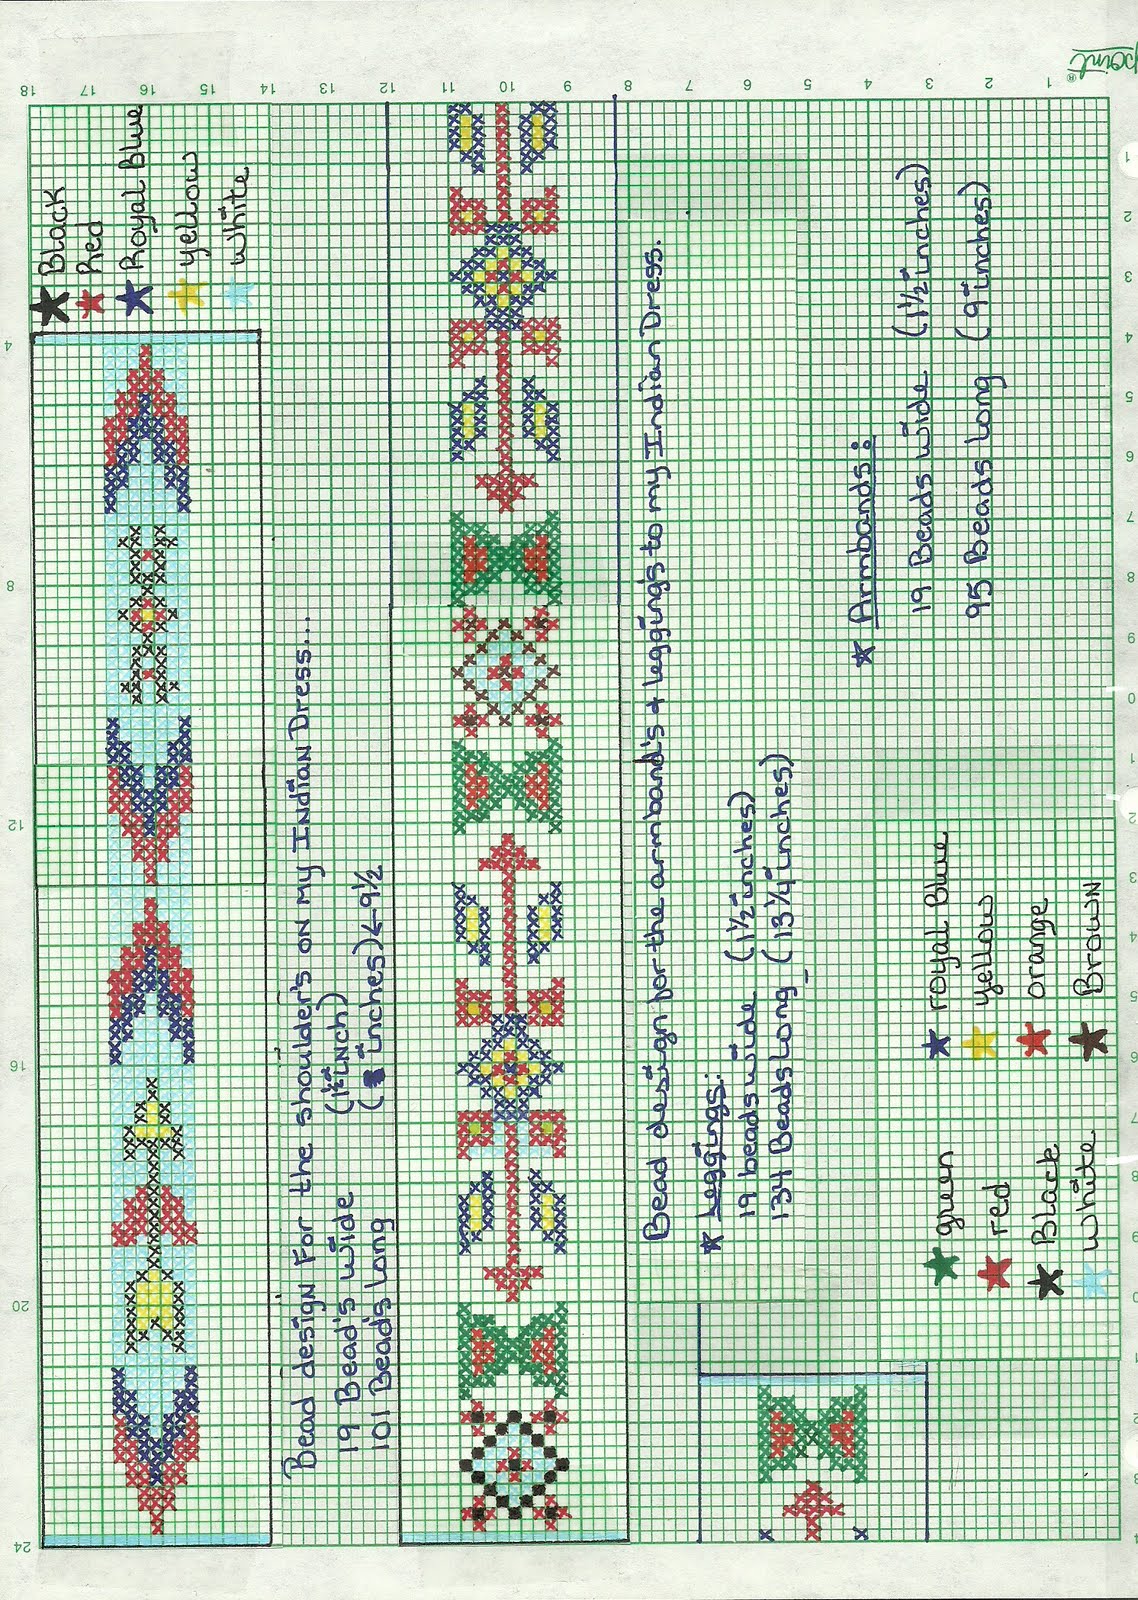 Welcome to Indian Crafts By Design: My Mandela and Bead Loom Pattern's